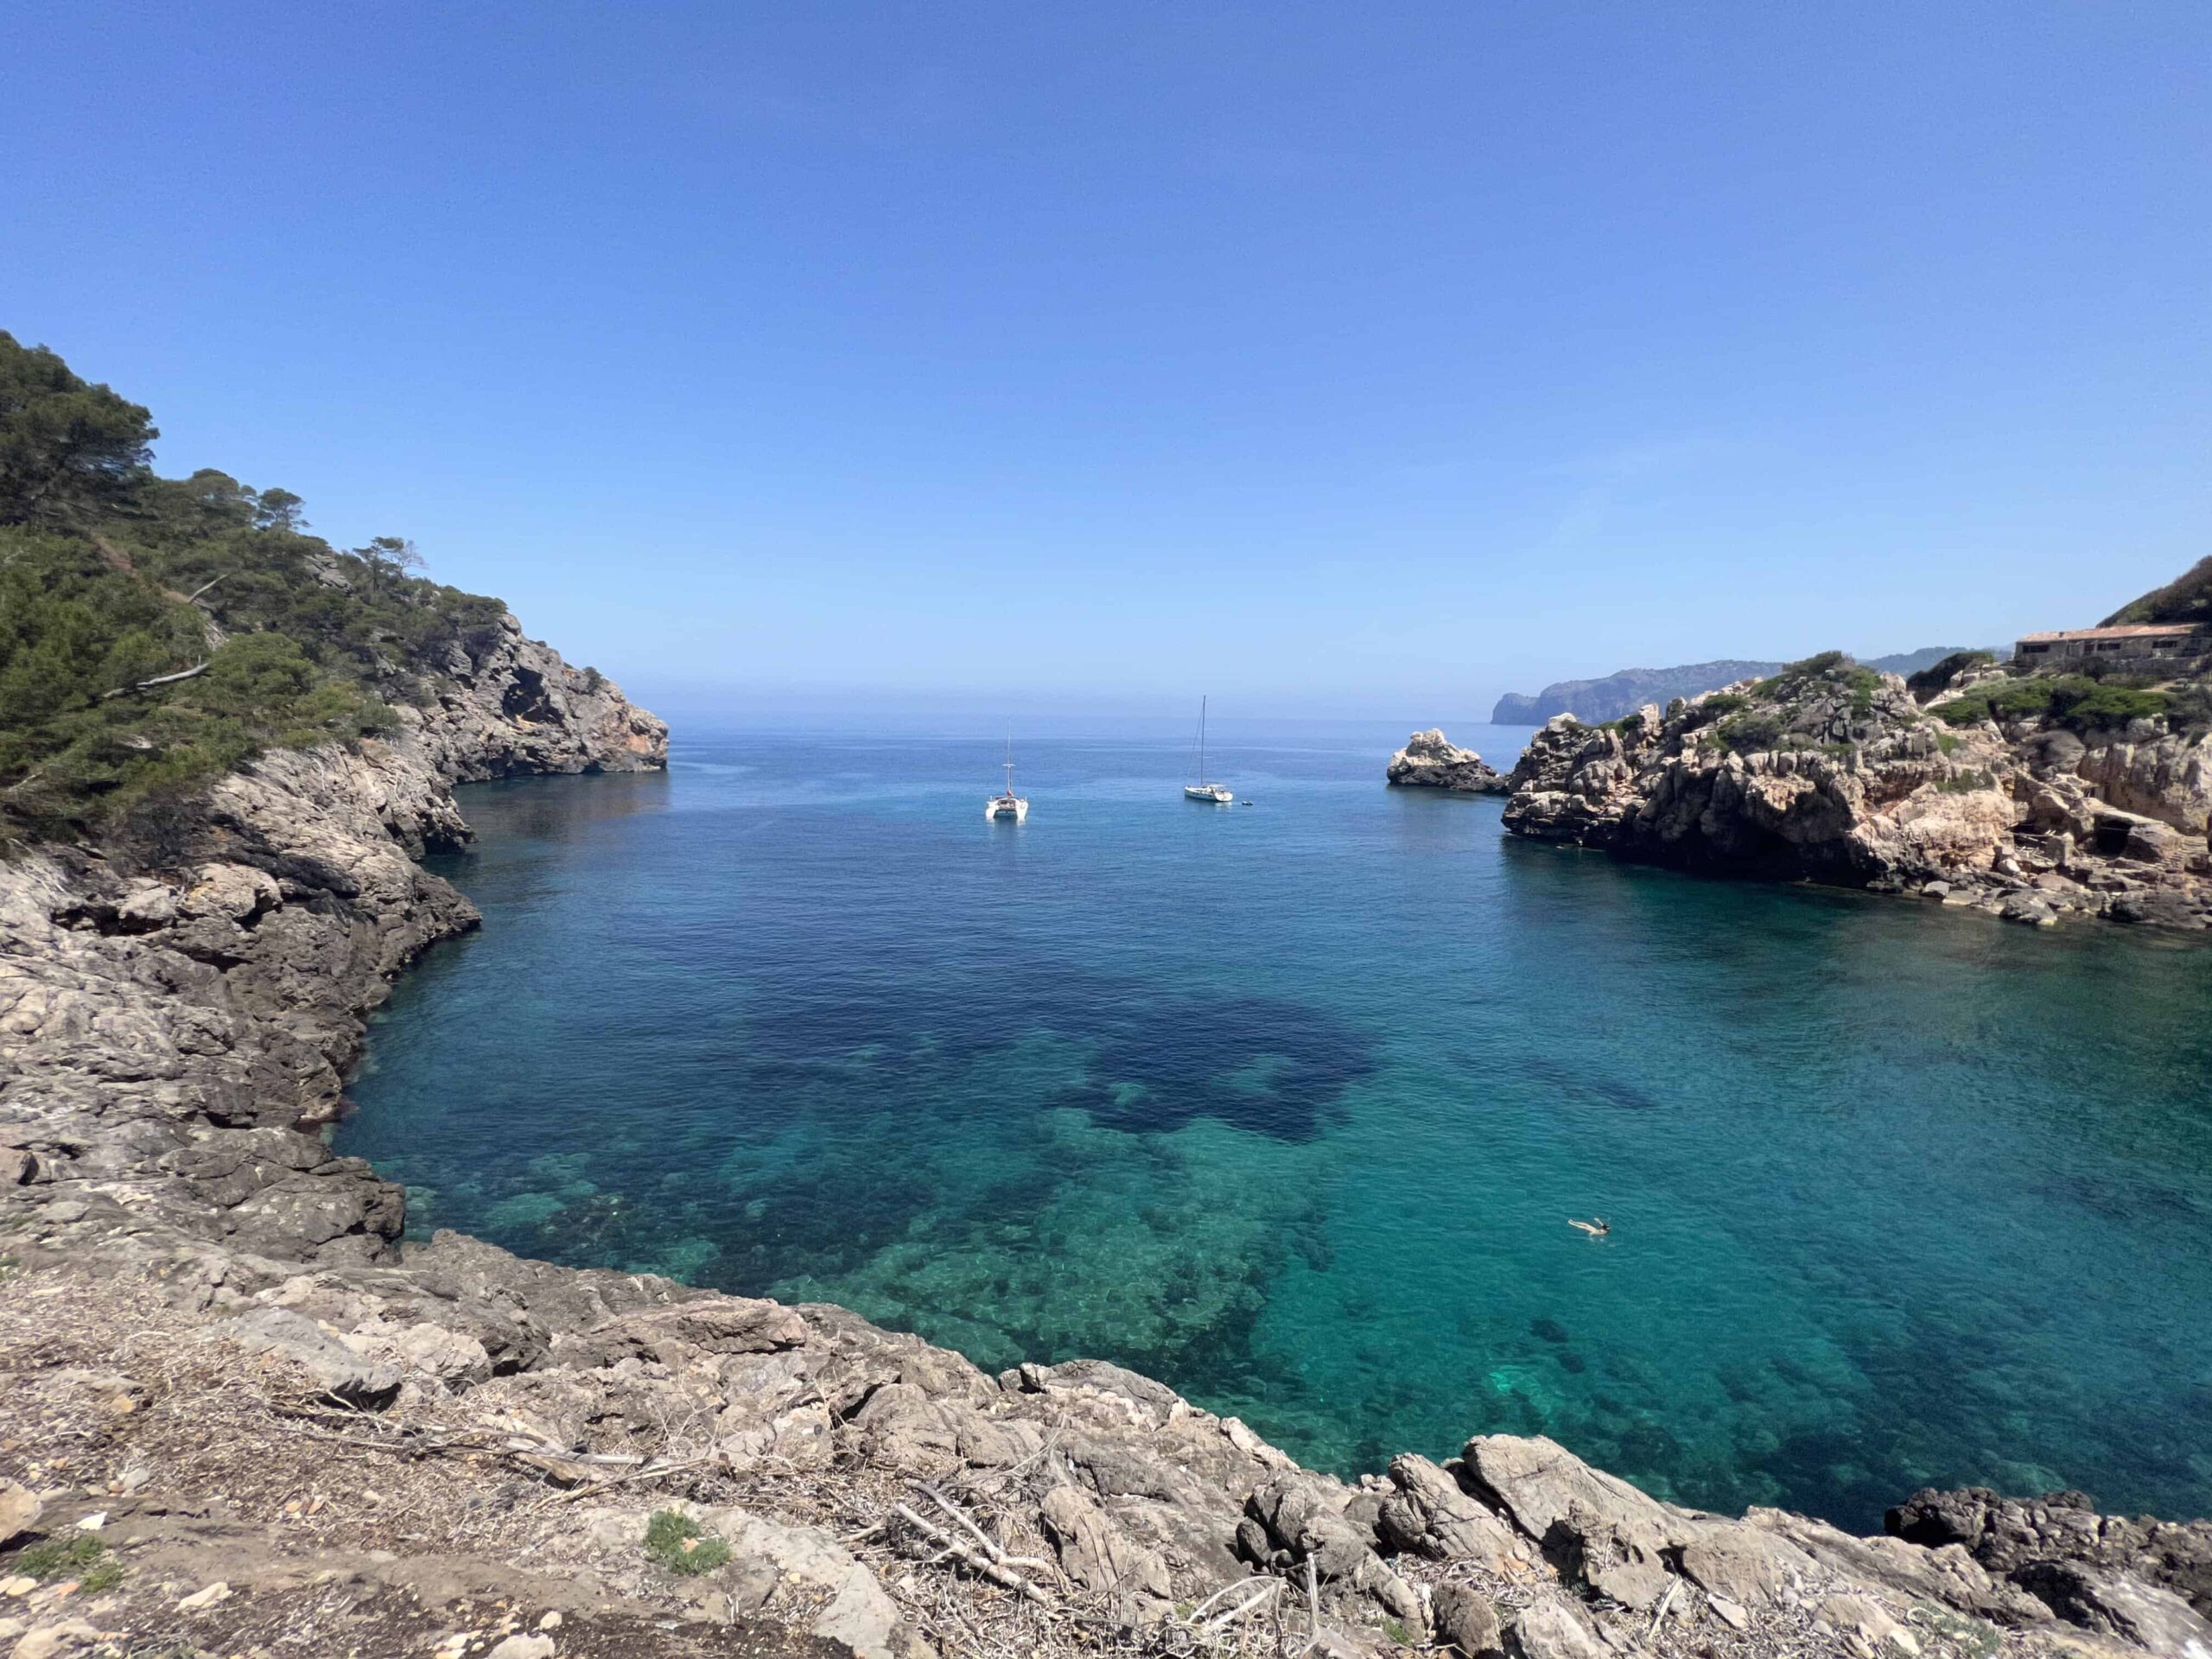 The bay of Caia Deia, one boat floating in the blue water, , one of the most beautiful beaches in Mallorca.